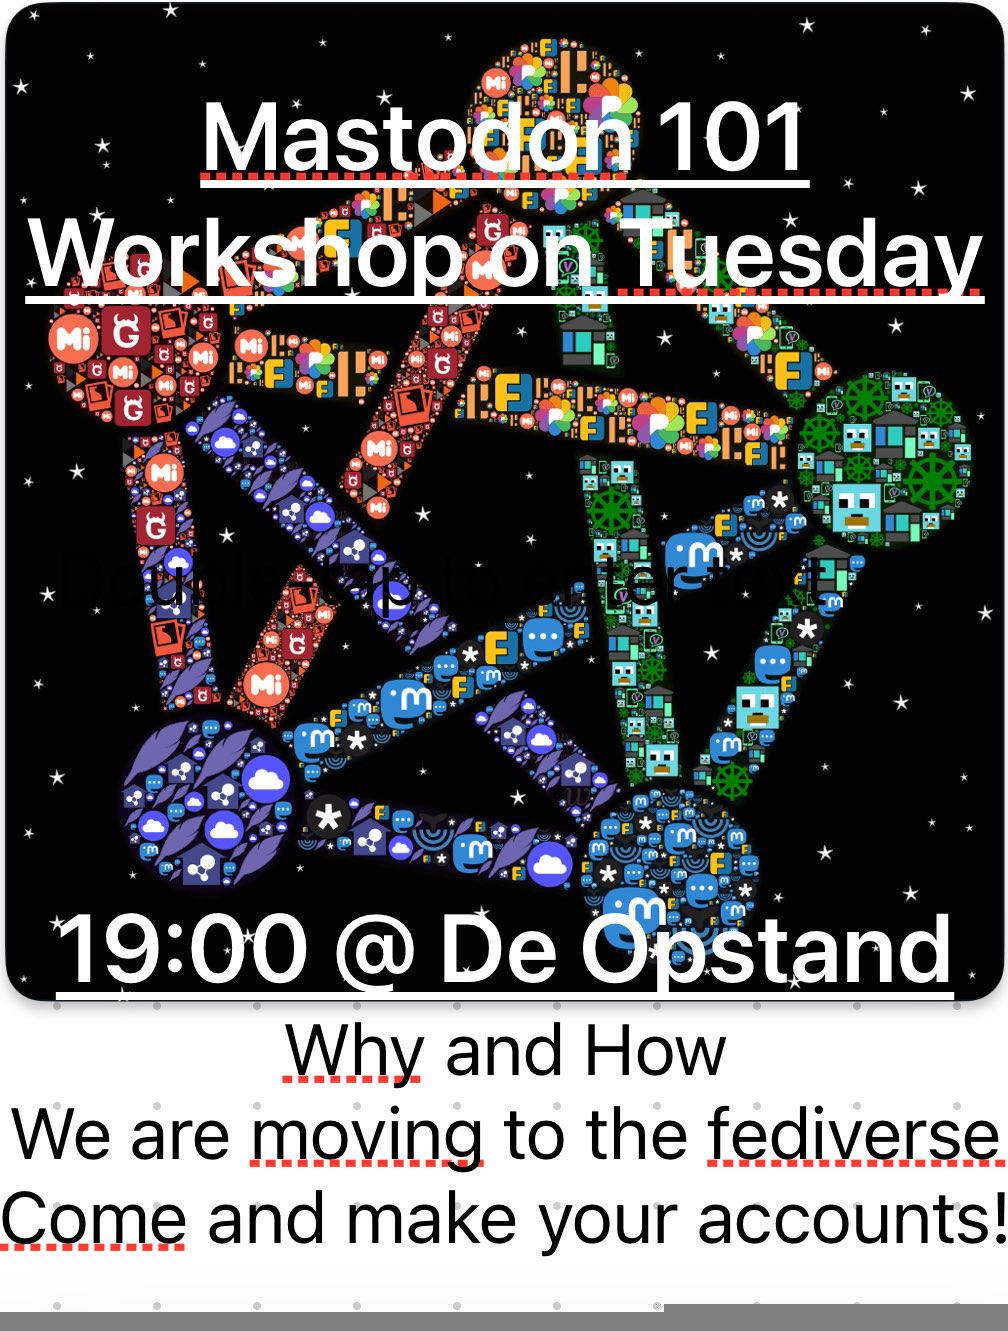 Masotodon 1010 Workshop on Tuesday, 19:00 at De Opstand. We and How. We are moving to the fediverse. Come and make your accounts!